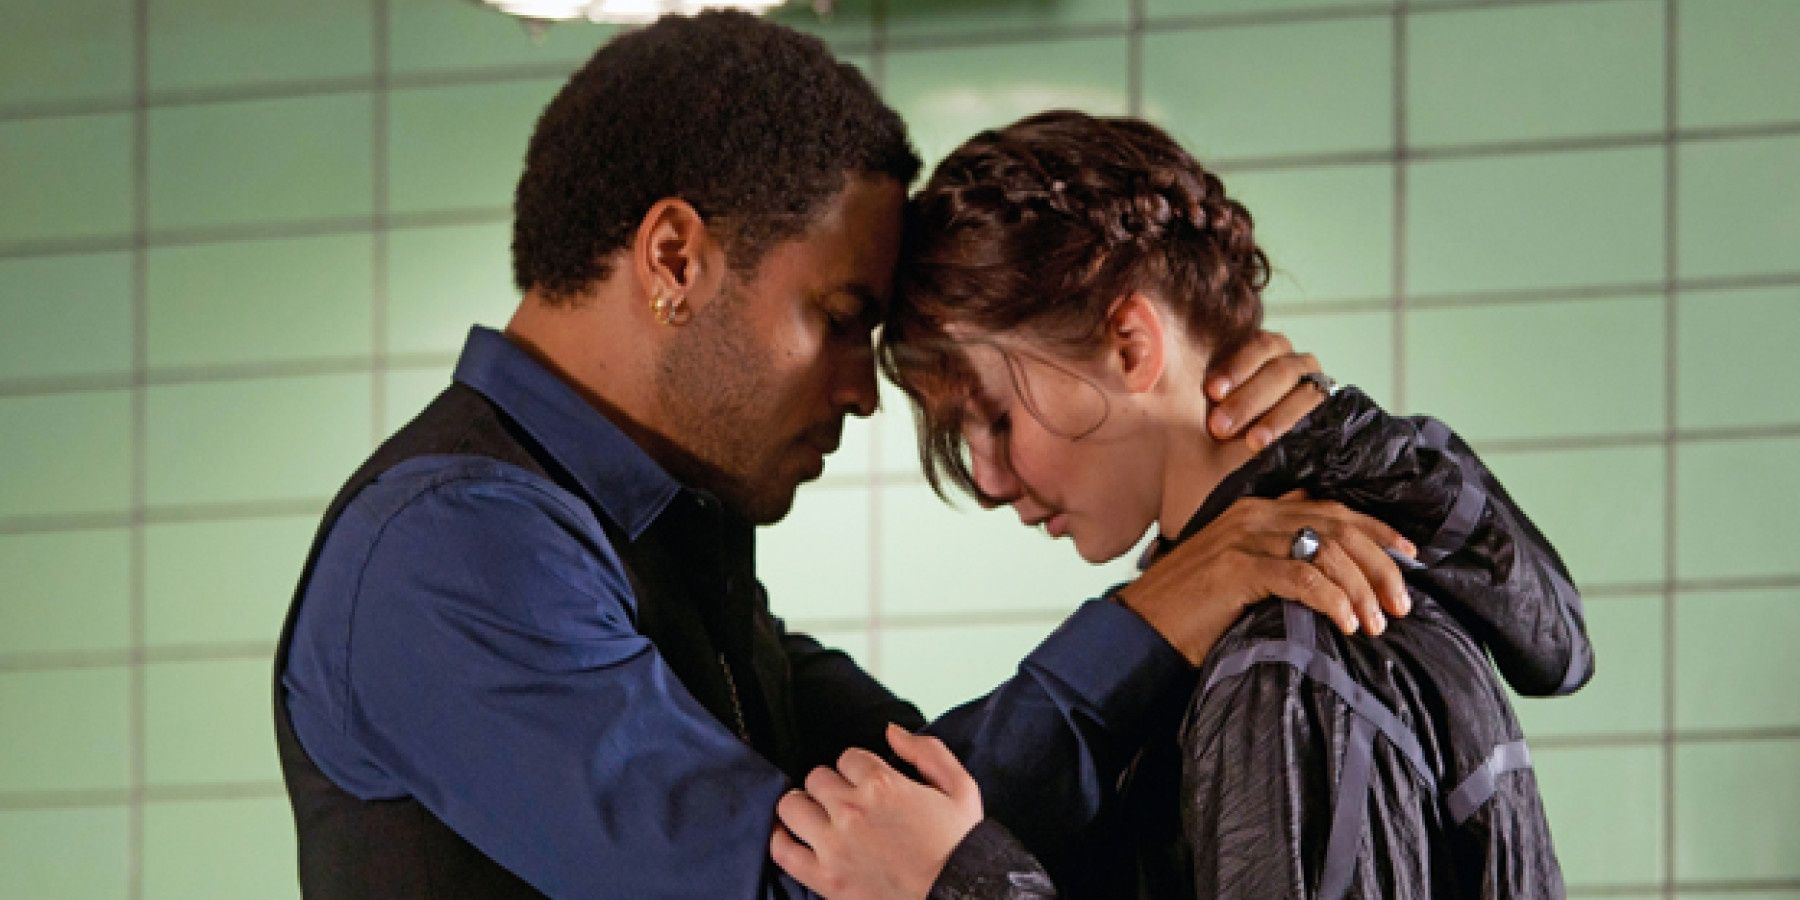 Cinna and Katniss leaning against one another before she has to go into the arena for the Hunger Games